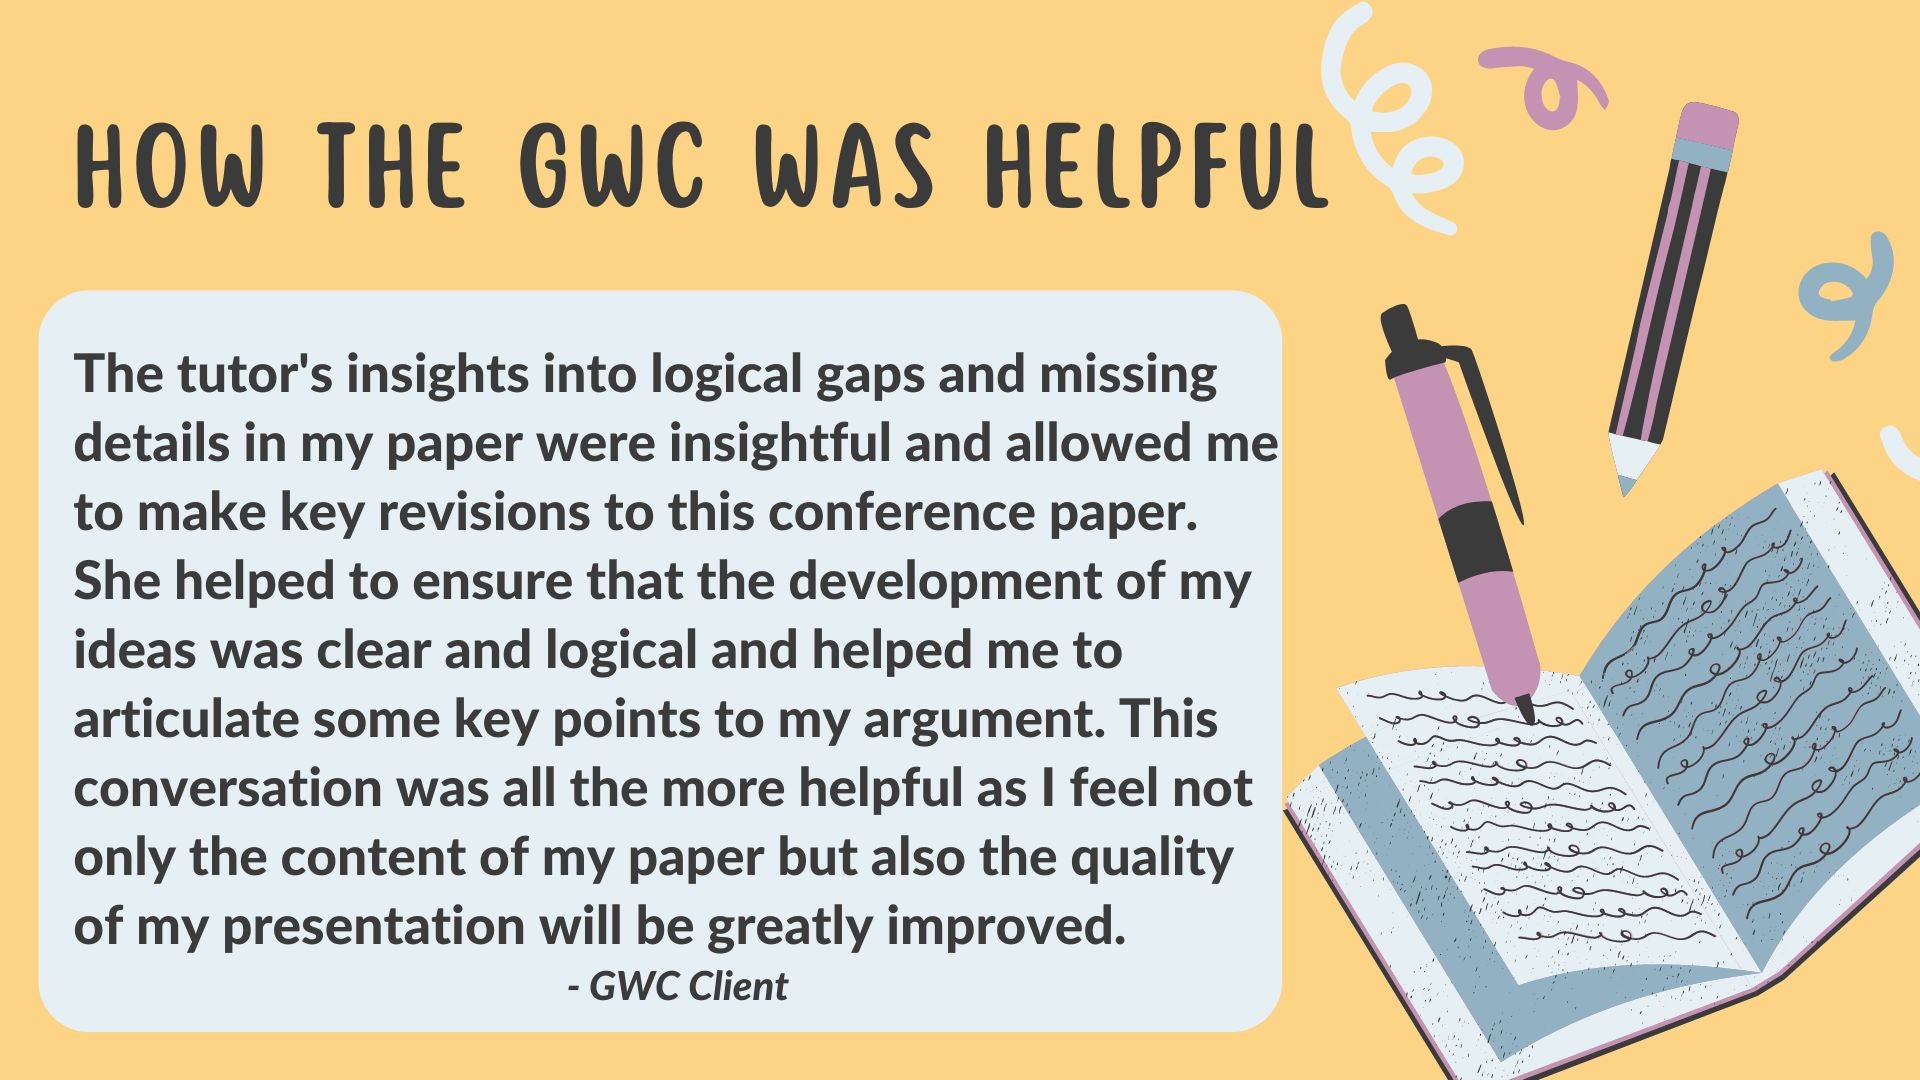 An image of GWC client feedback regarding "how the GWC was helpful": The tutor's insights into logical gaps and missing details in my paper were insightful and allowed me to make key revisions to this conference paper. She helped to ensure that the development of my ideas was clear and logical and helped me to articulate some key points to my argument. This conversation was all the more helpful as I feel not only the content of my paper but also the quality of my presentation will be greatly improved"